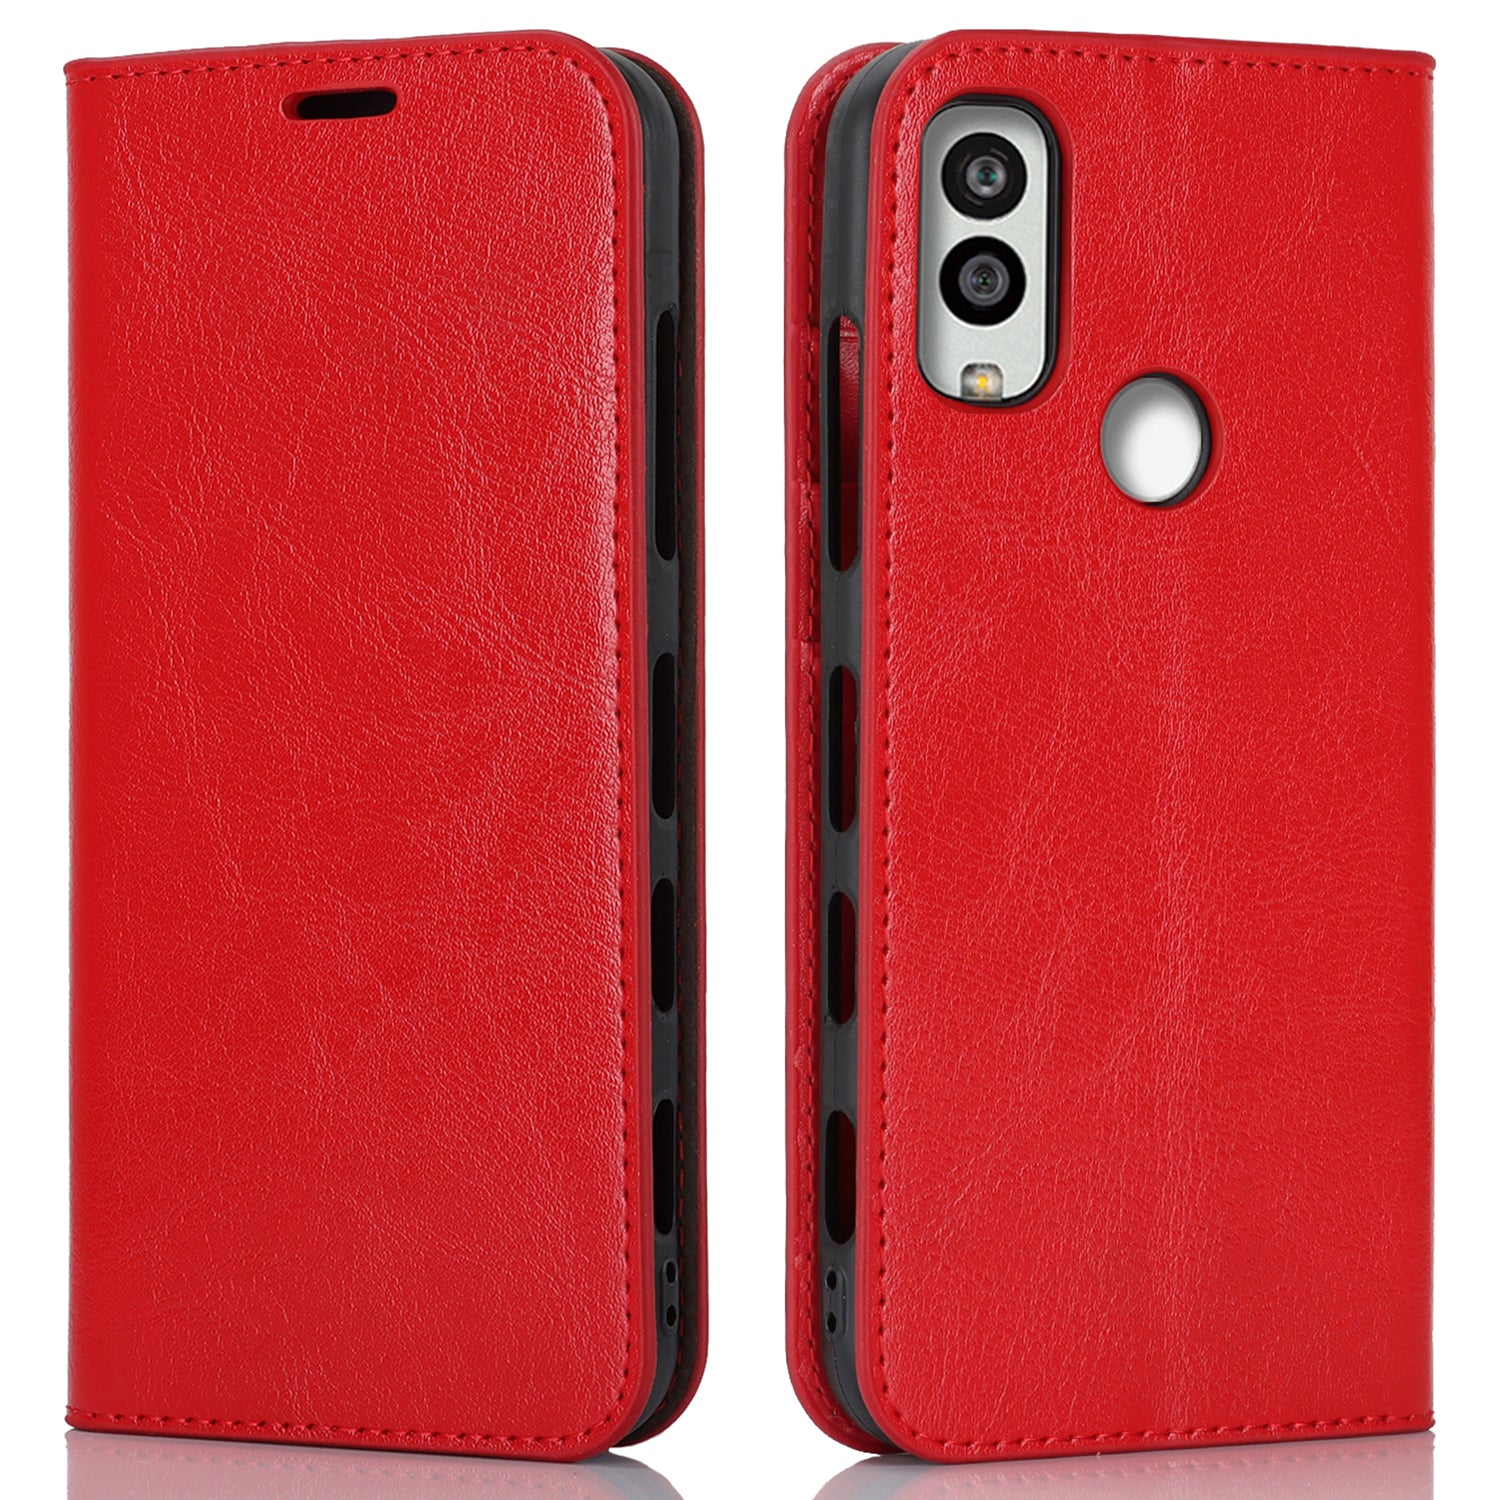 Uniqkart for Kyocera Android One S10 / One S9 Fall Proof Phone Case Crazy Horse Texture Genuine Cow Leather Stand Wallet Cover - Red